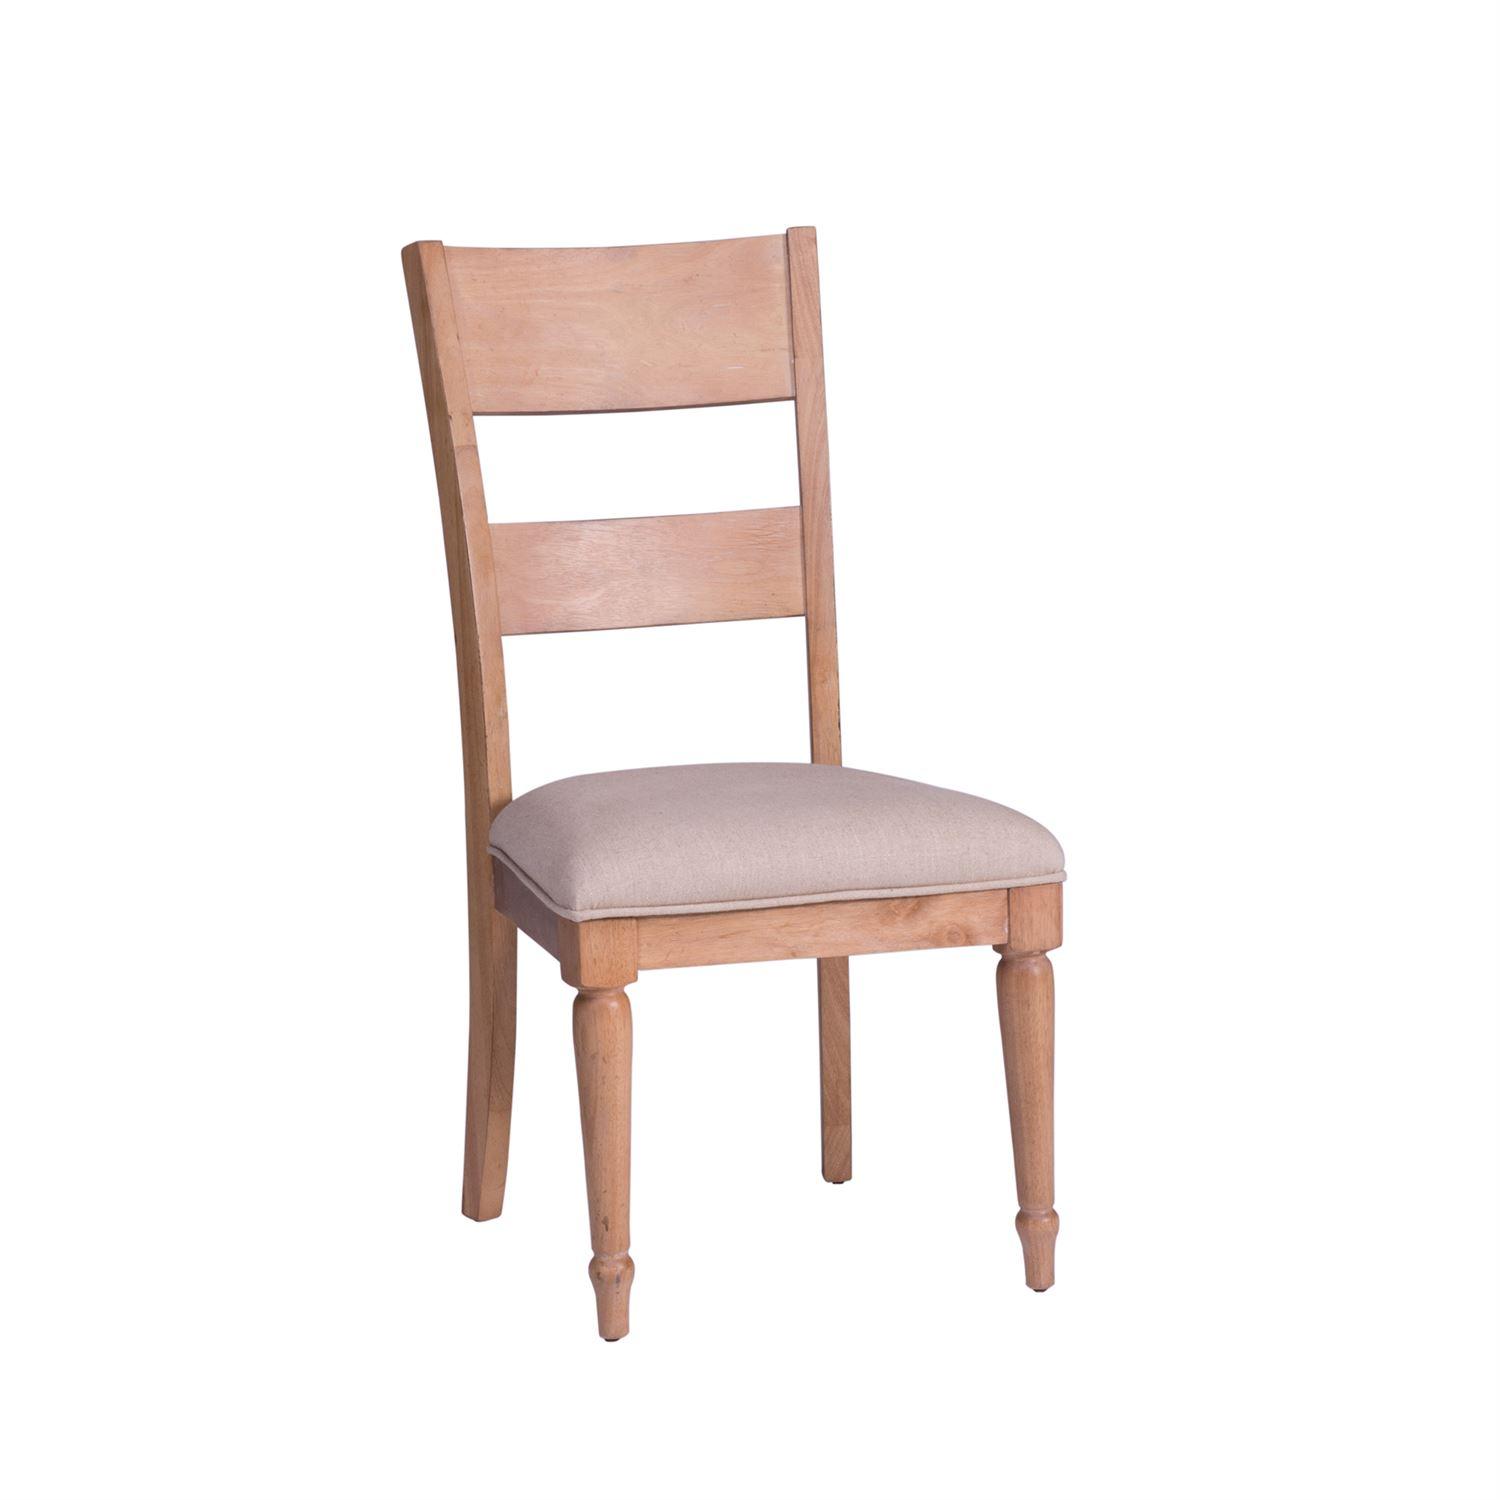   Harbor View  (531-DR) Dining Side Chair  